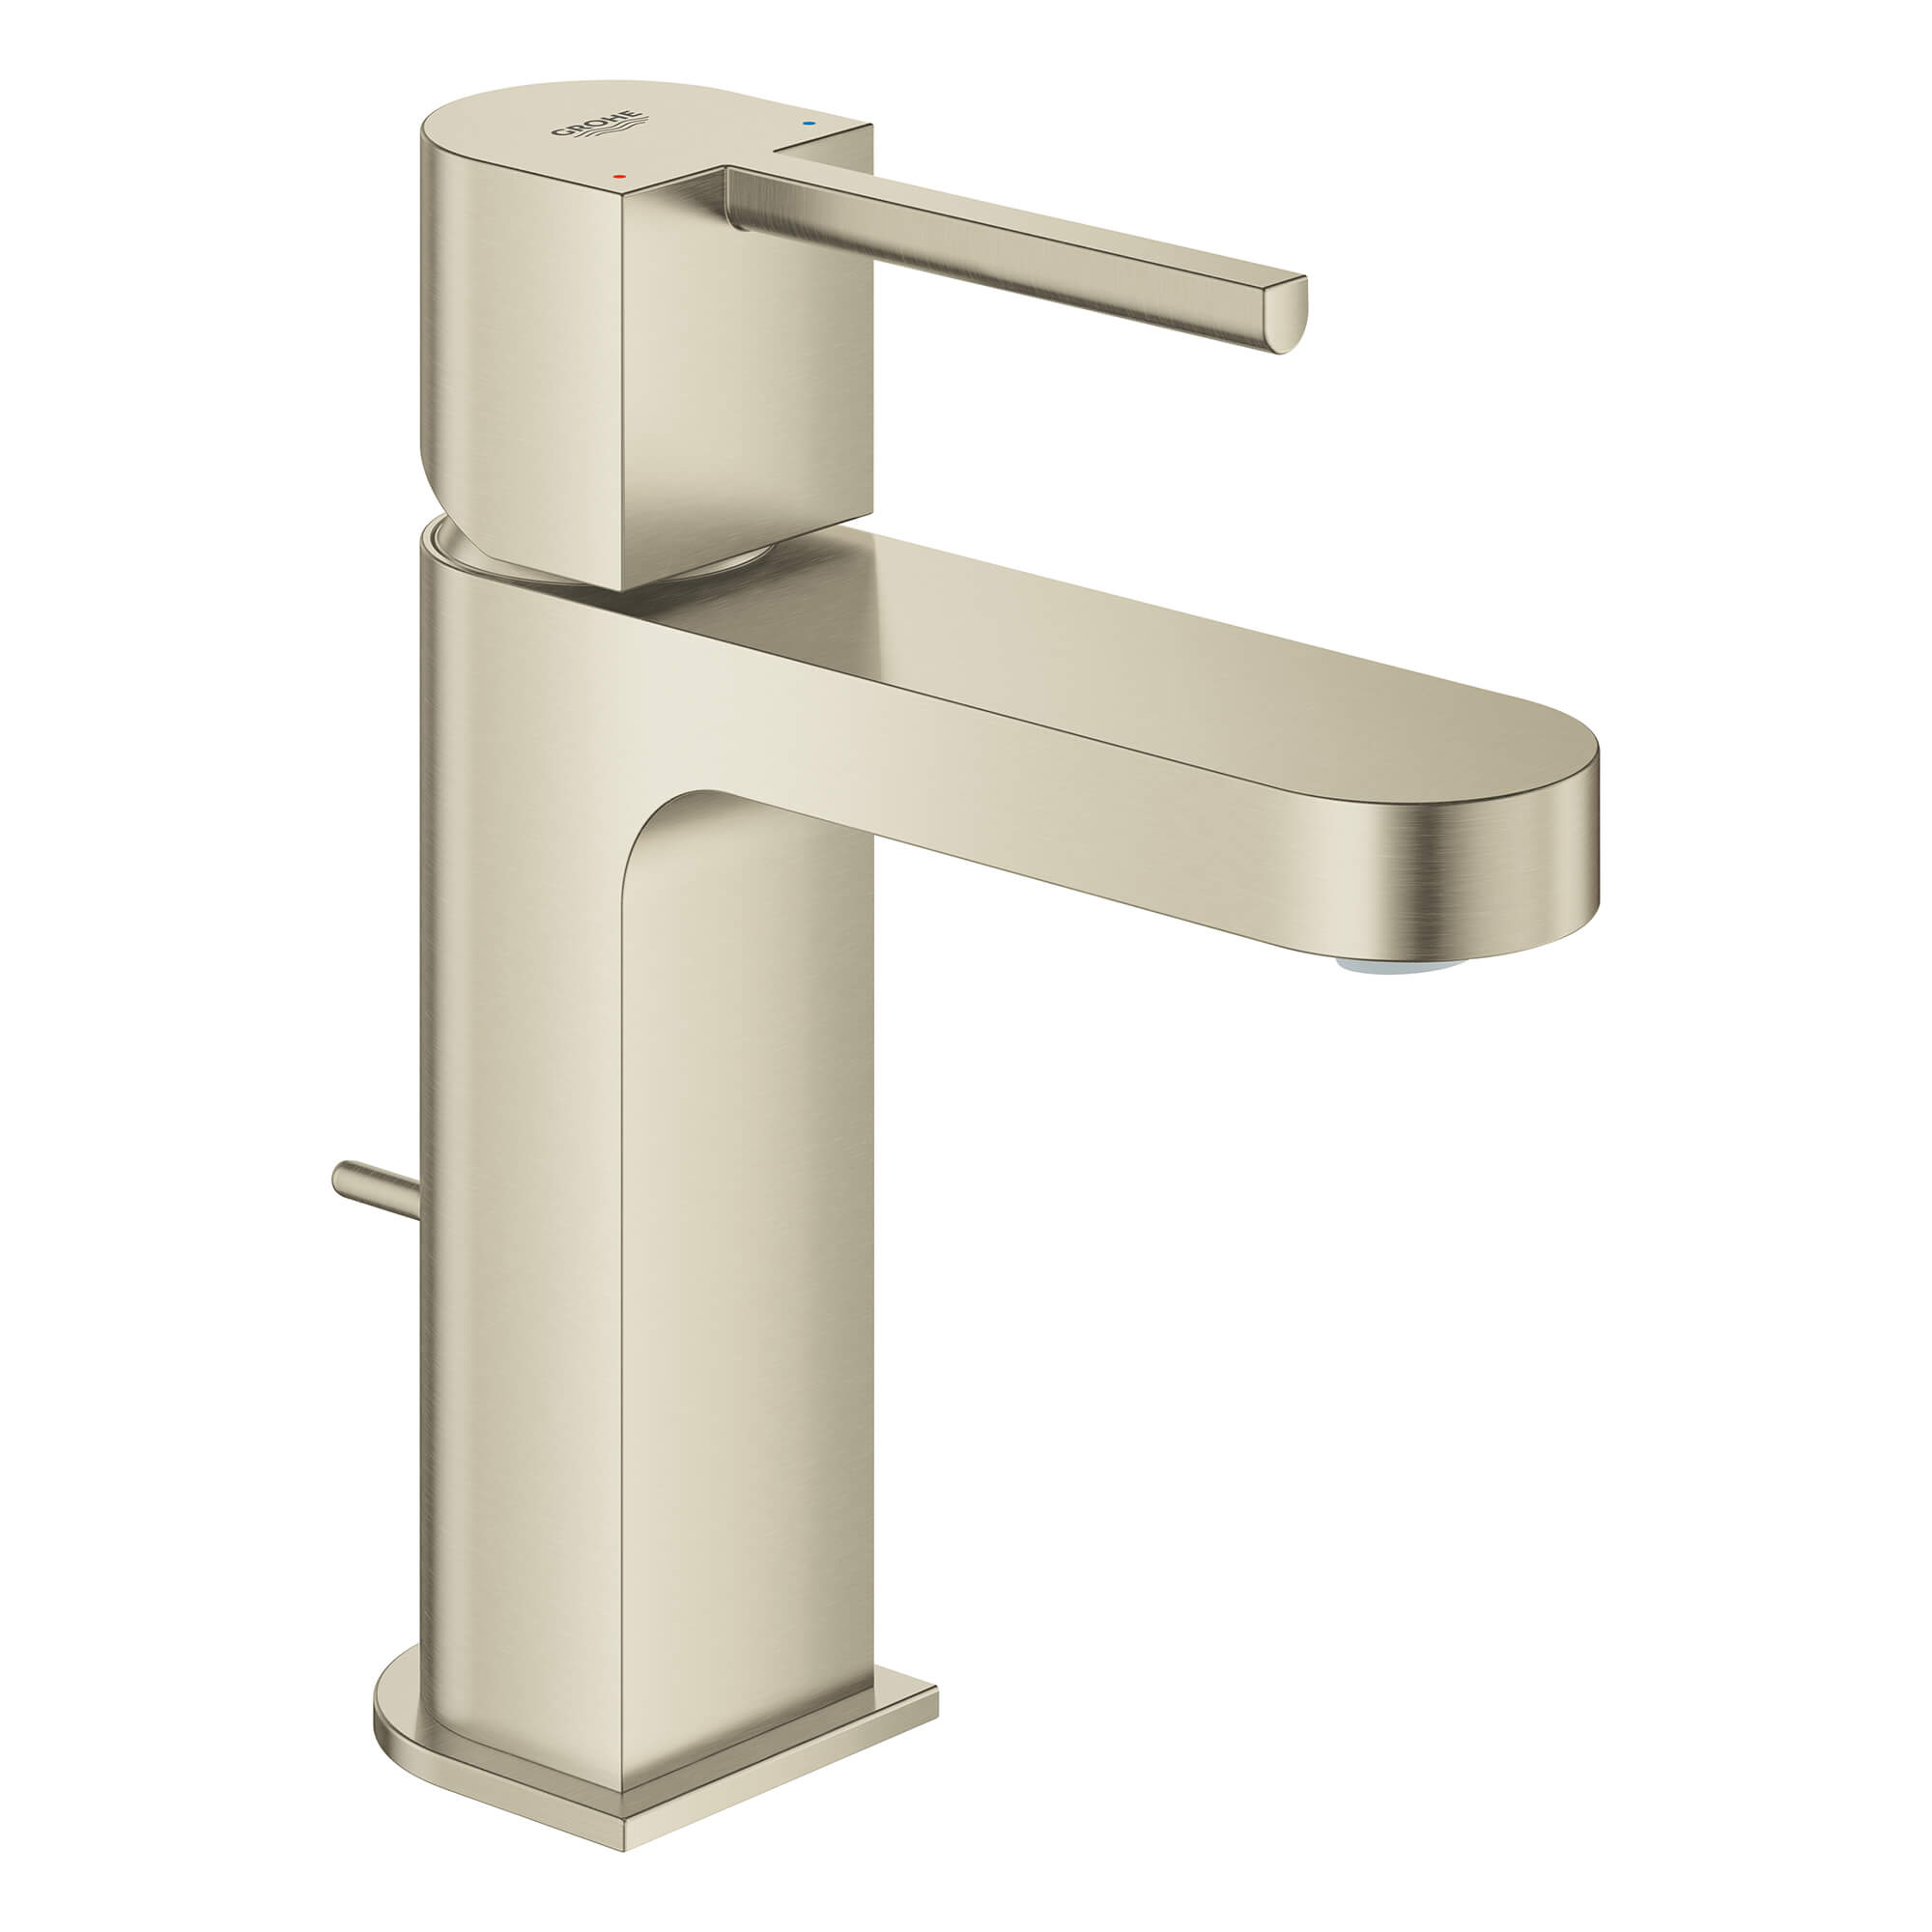 Plus Single Hole Lav Faucet in Brushed Nickel Infinity 1.2 gpm